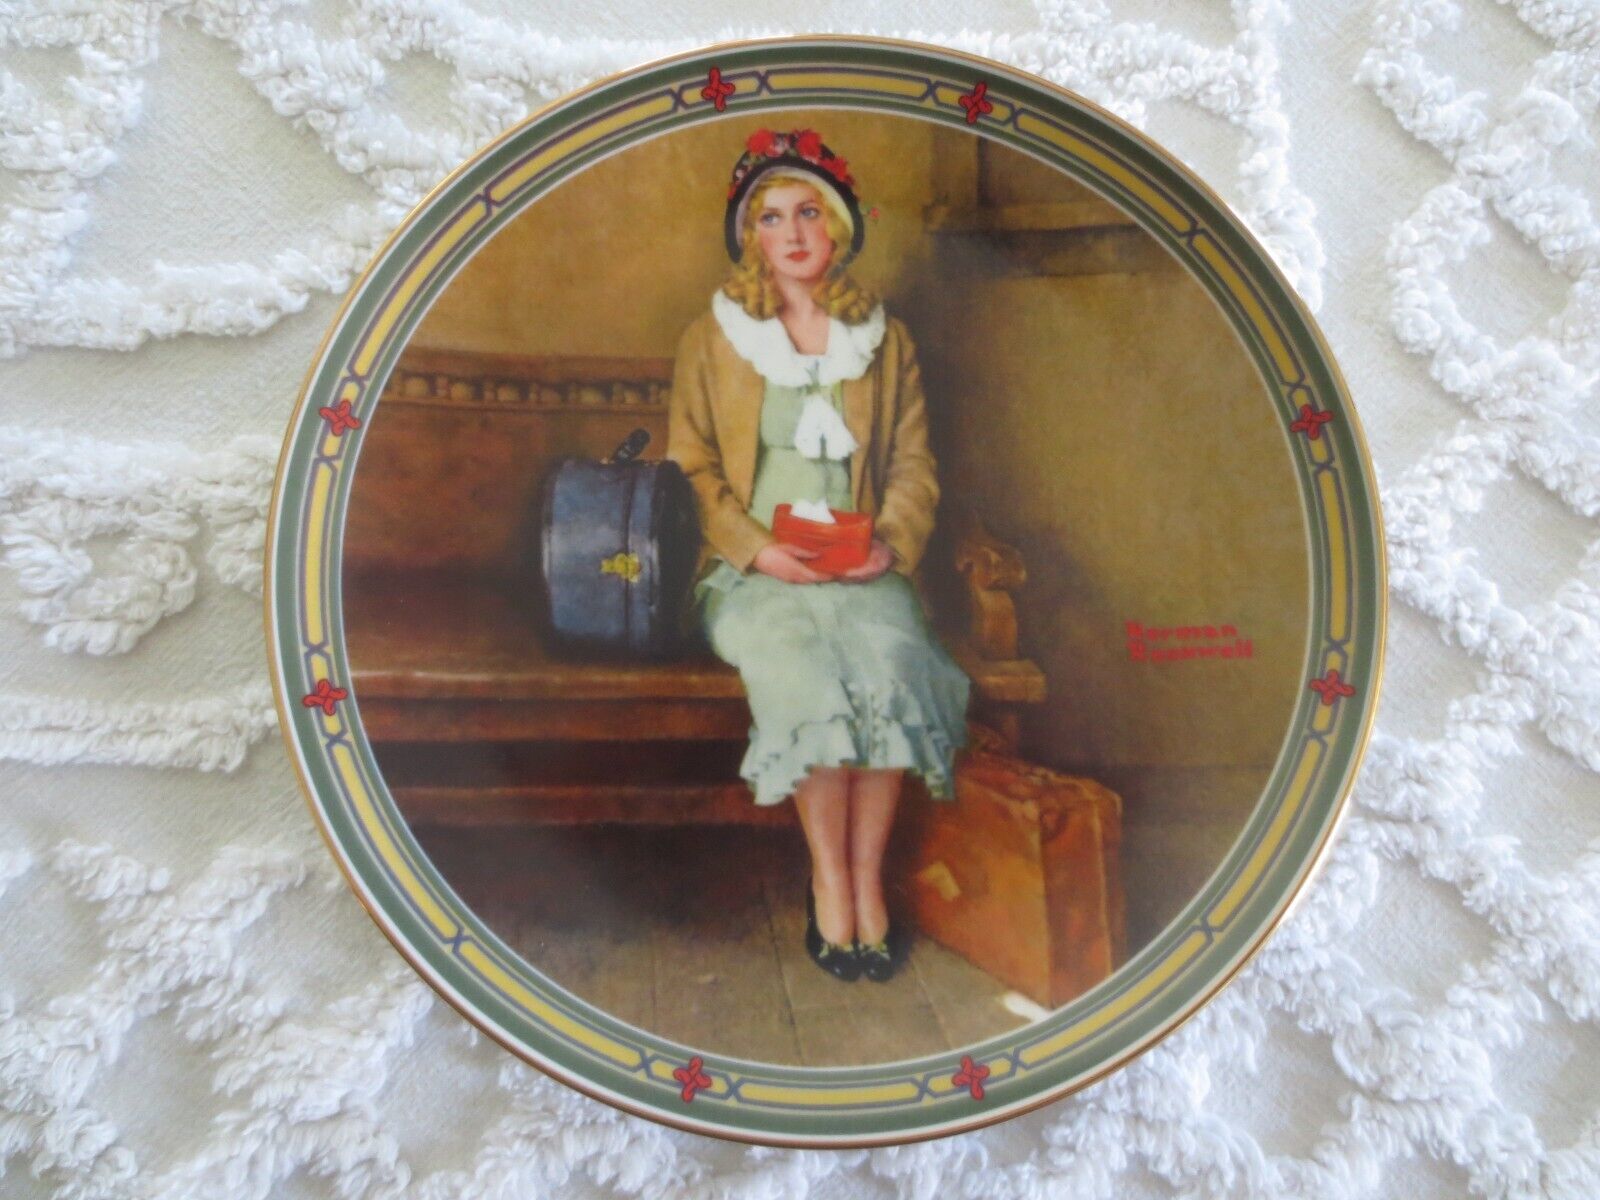 Primary image for Knowles 8-1/2" Norman Rockwell A YOUNG GIRL'S DREAM Collector PLATE - 1985